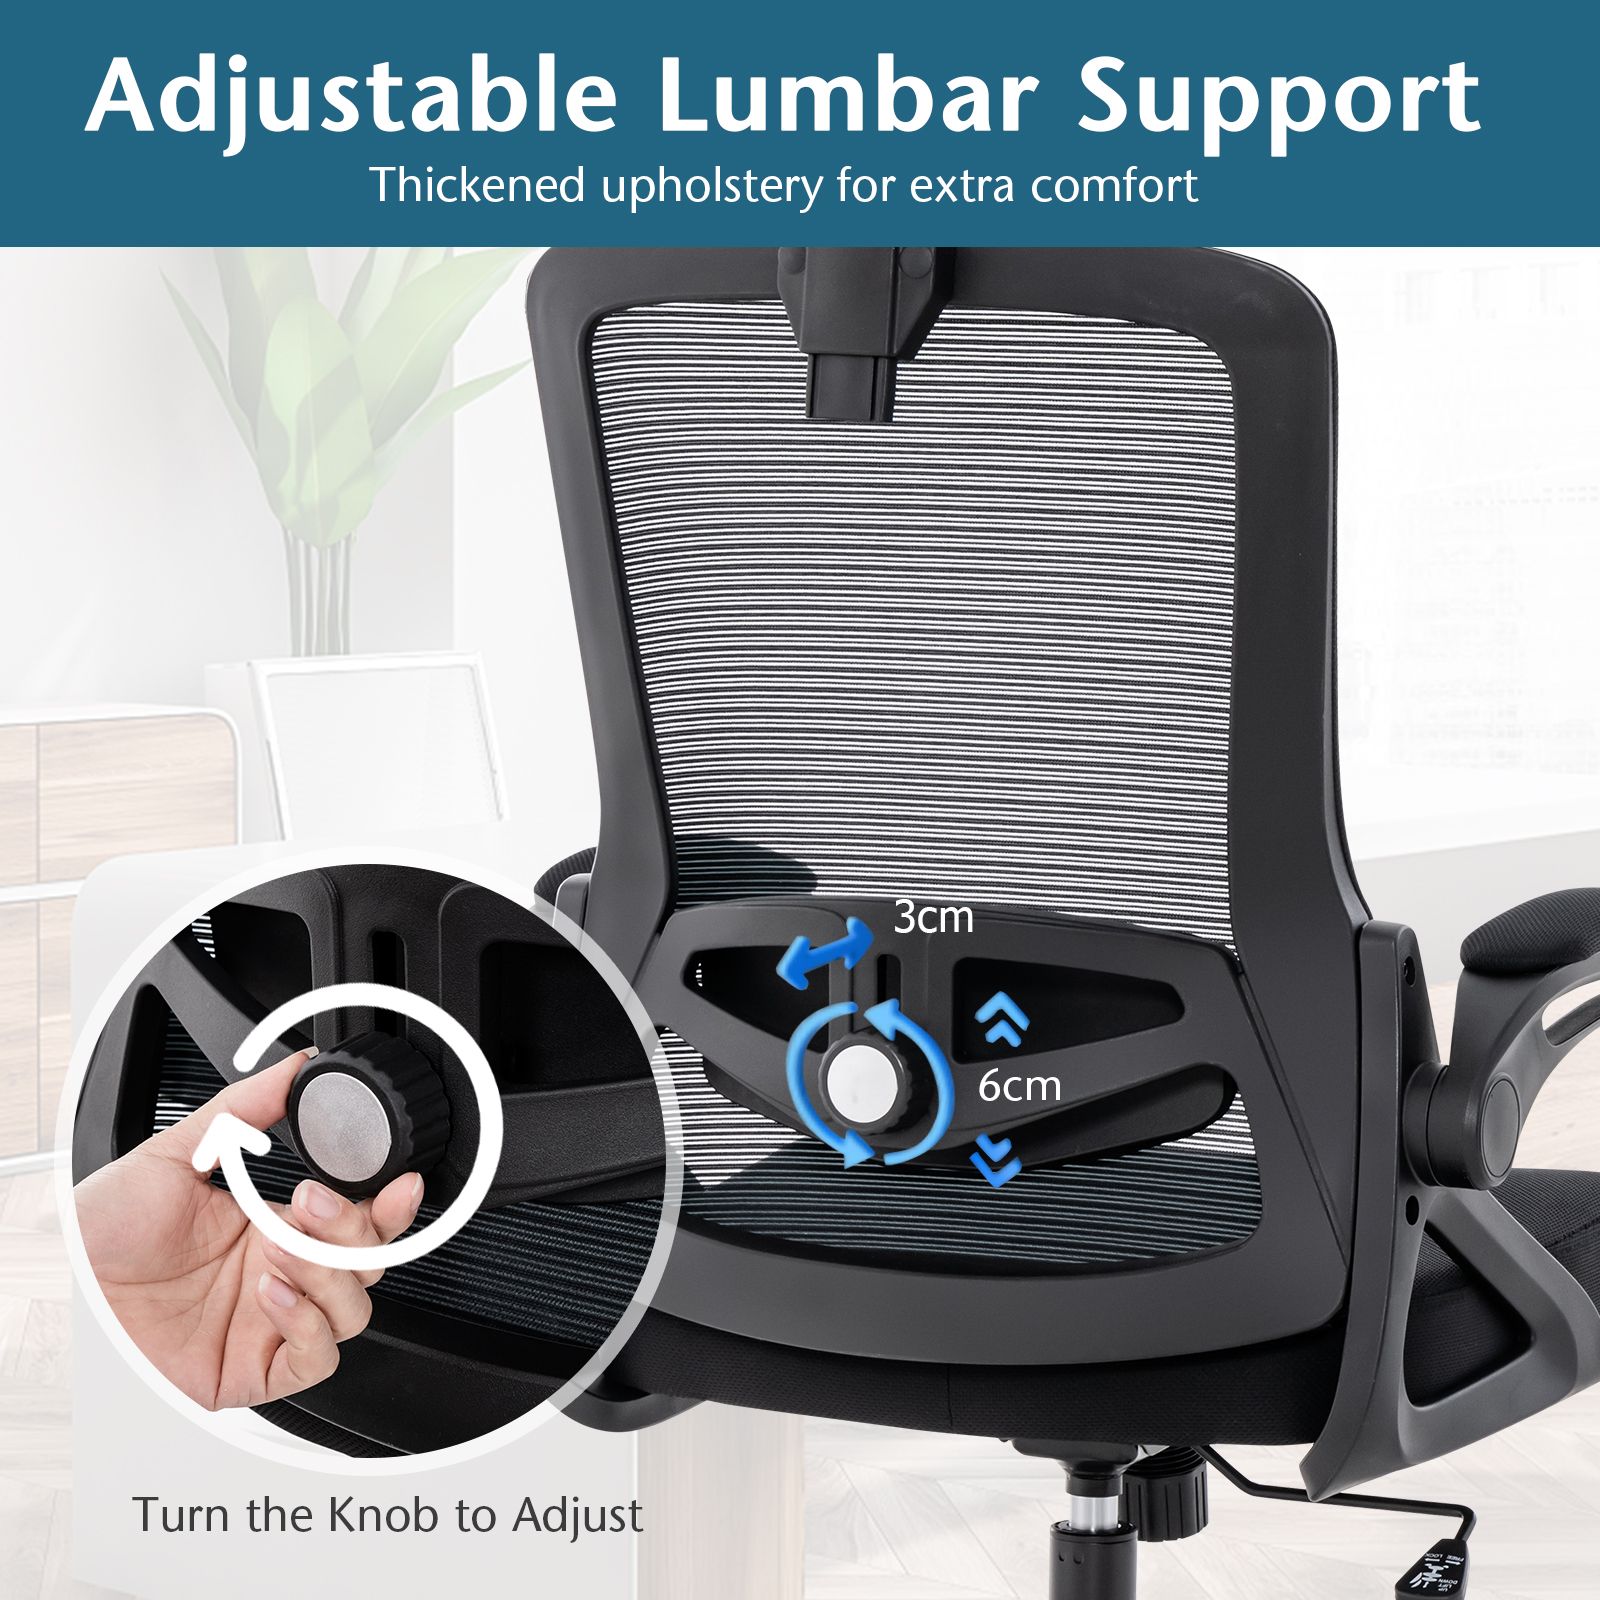 Ergonomic Office Chair with Adjustable Lumbar Support for Home Office Black